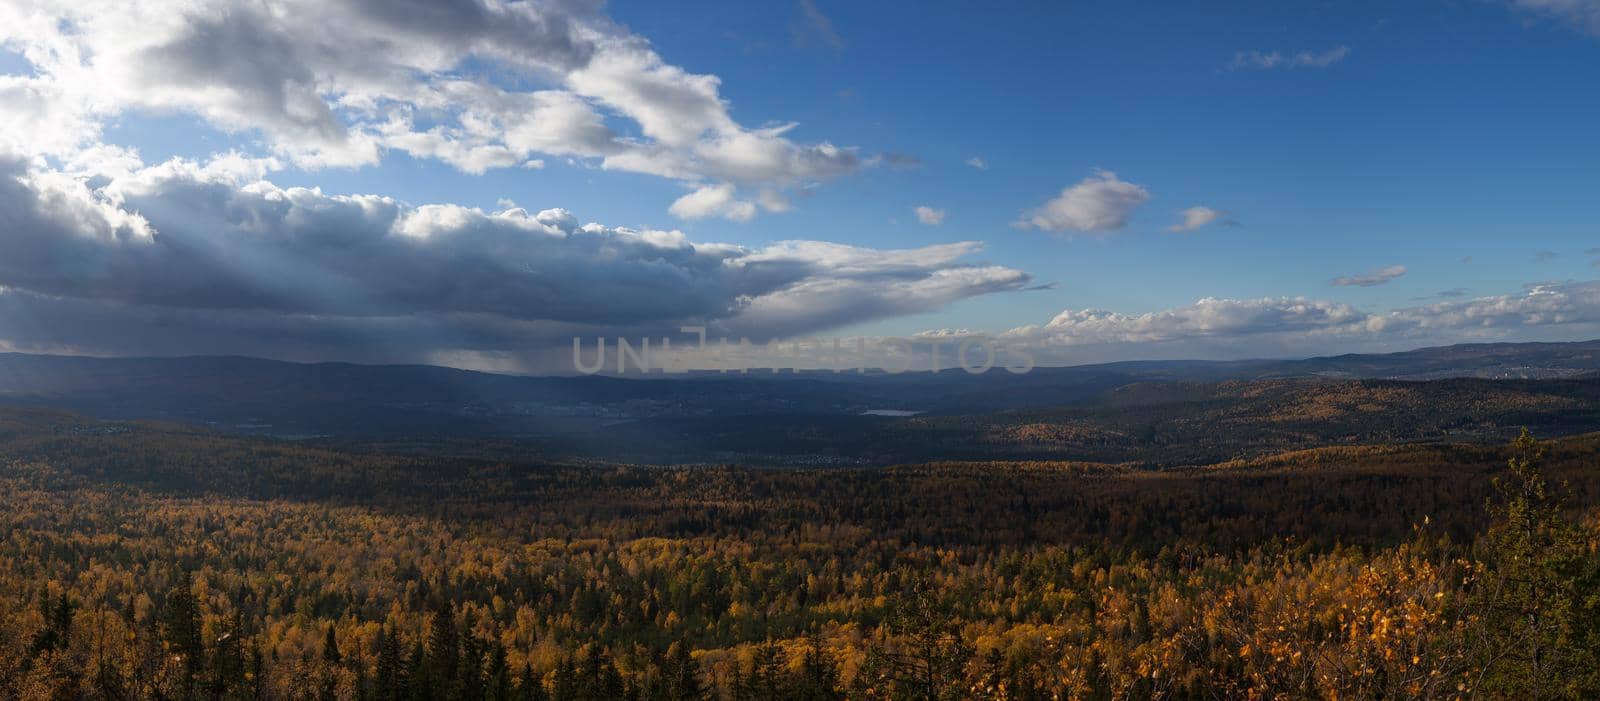 Autumn forest mountain landscape. View from the top of the mountain